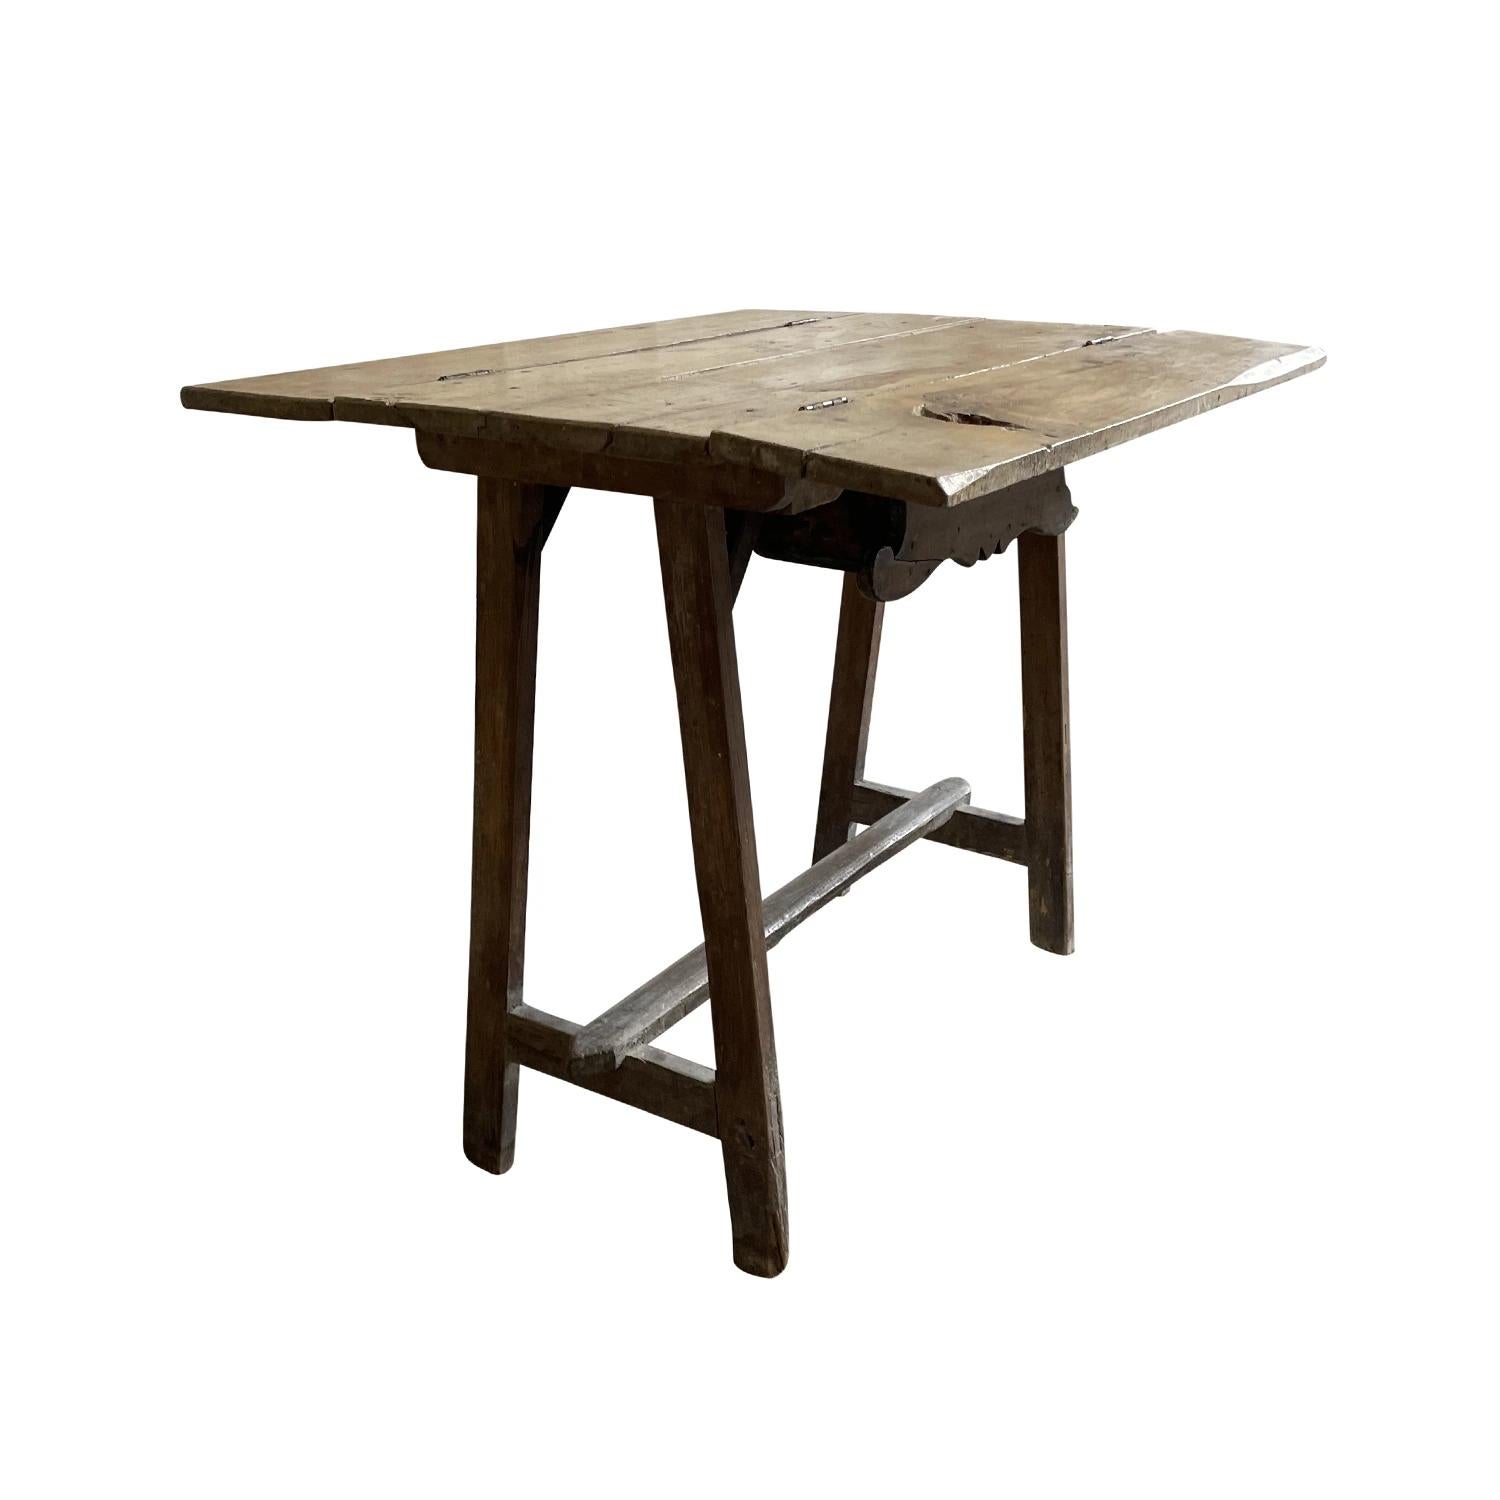 Hand-Carved 18th Century Italian Small Foldable Walnut Side Table - Antique Tuscan Table For Sale